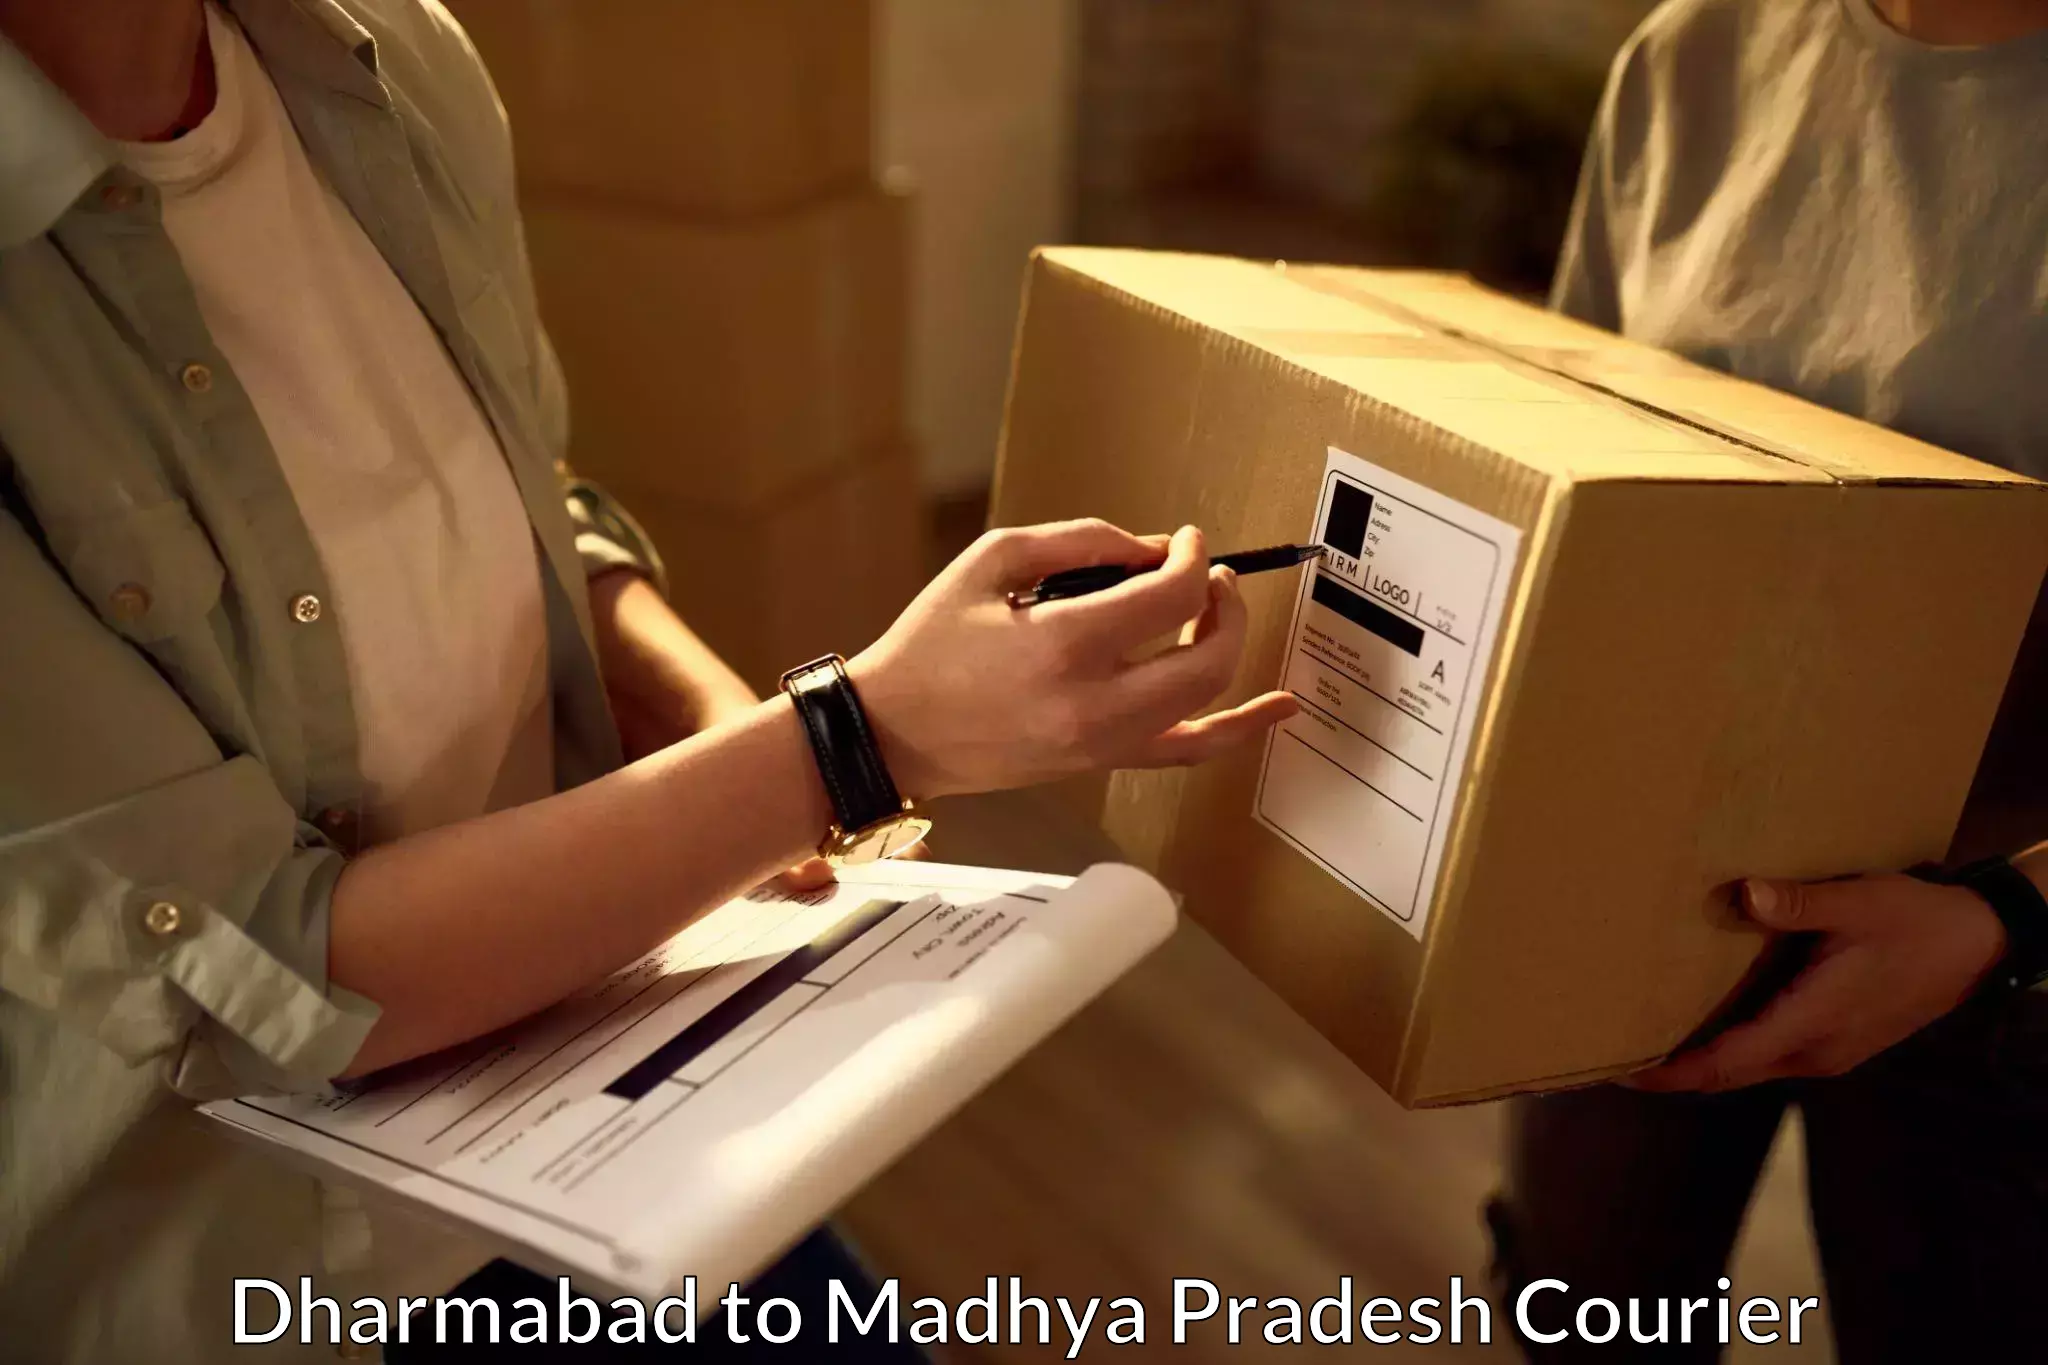 Easy access courier services Dharmabad to BHEL Bhopal